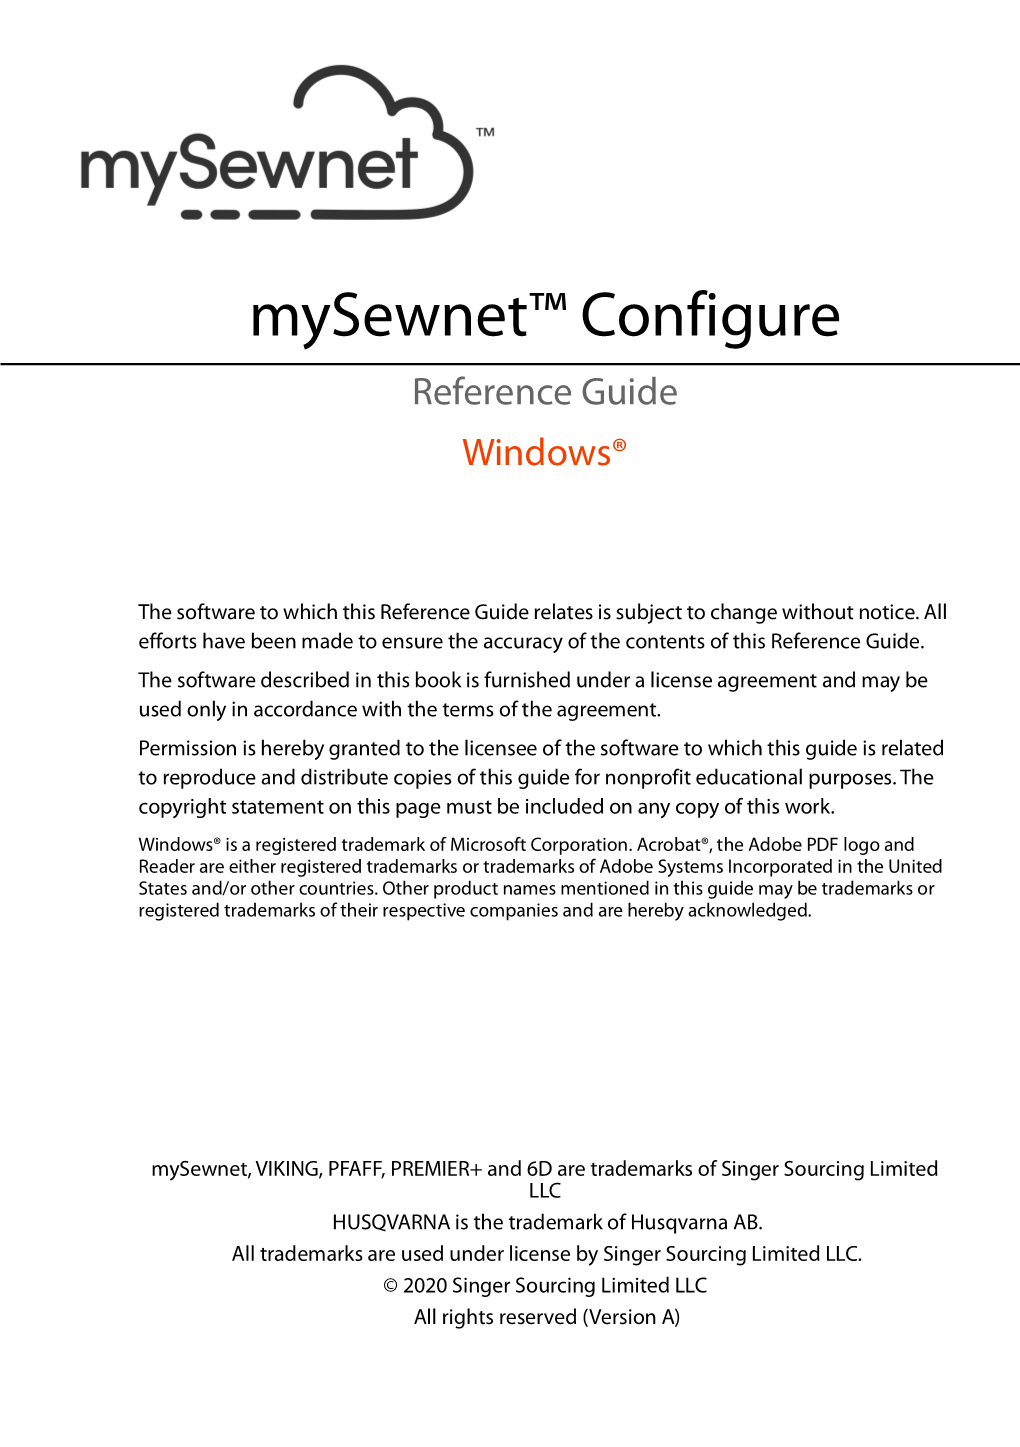 Mysewnet™ Configure Reference Guide Windows®